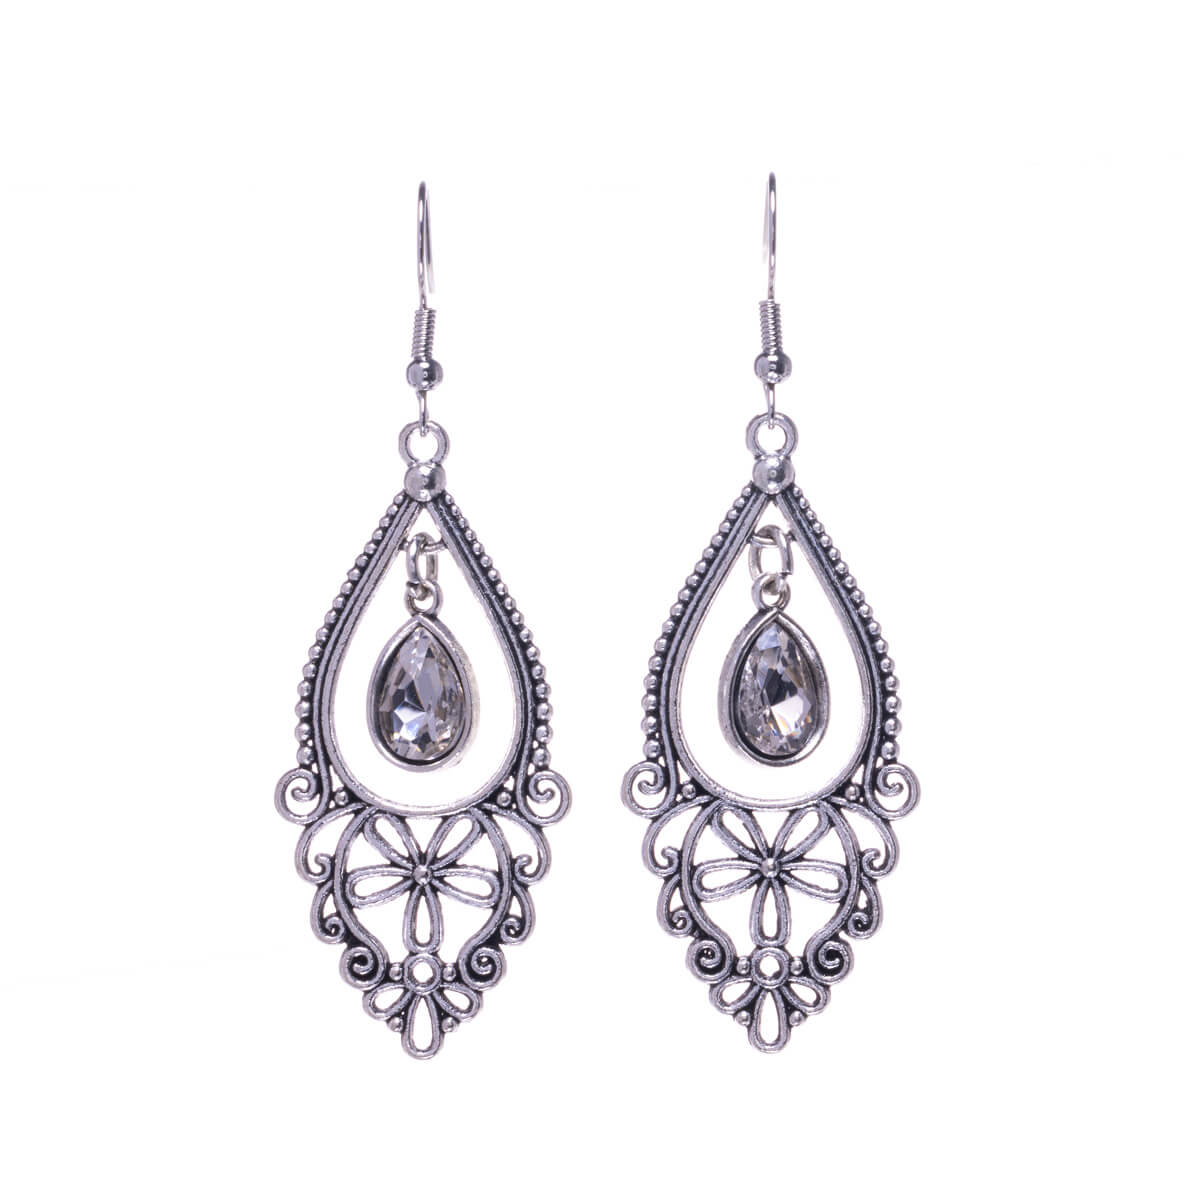 Decorative drop earrings with glass stone